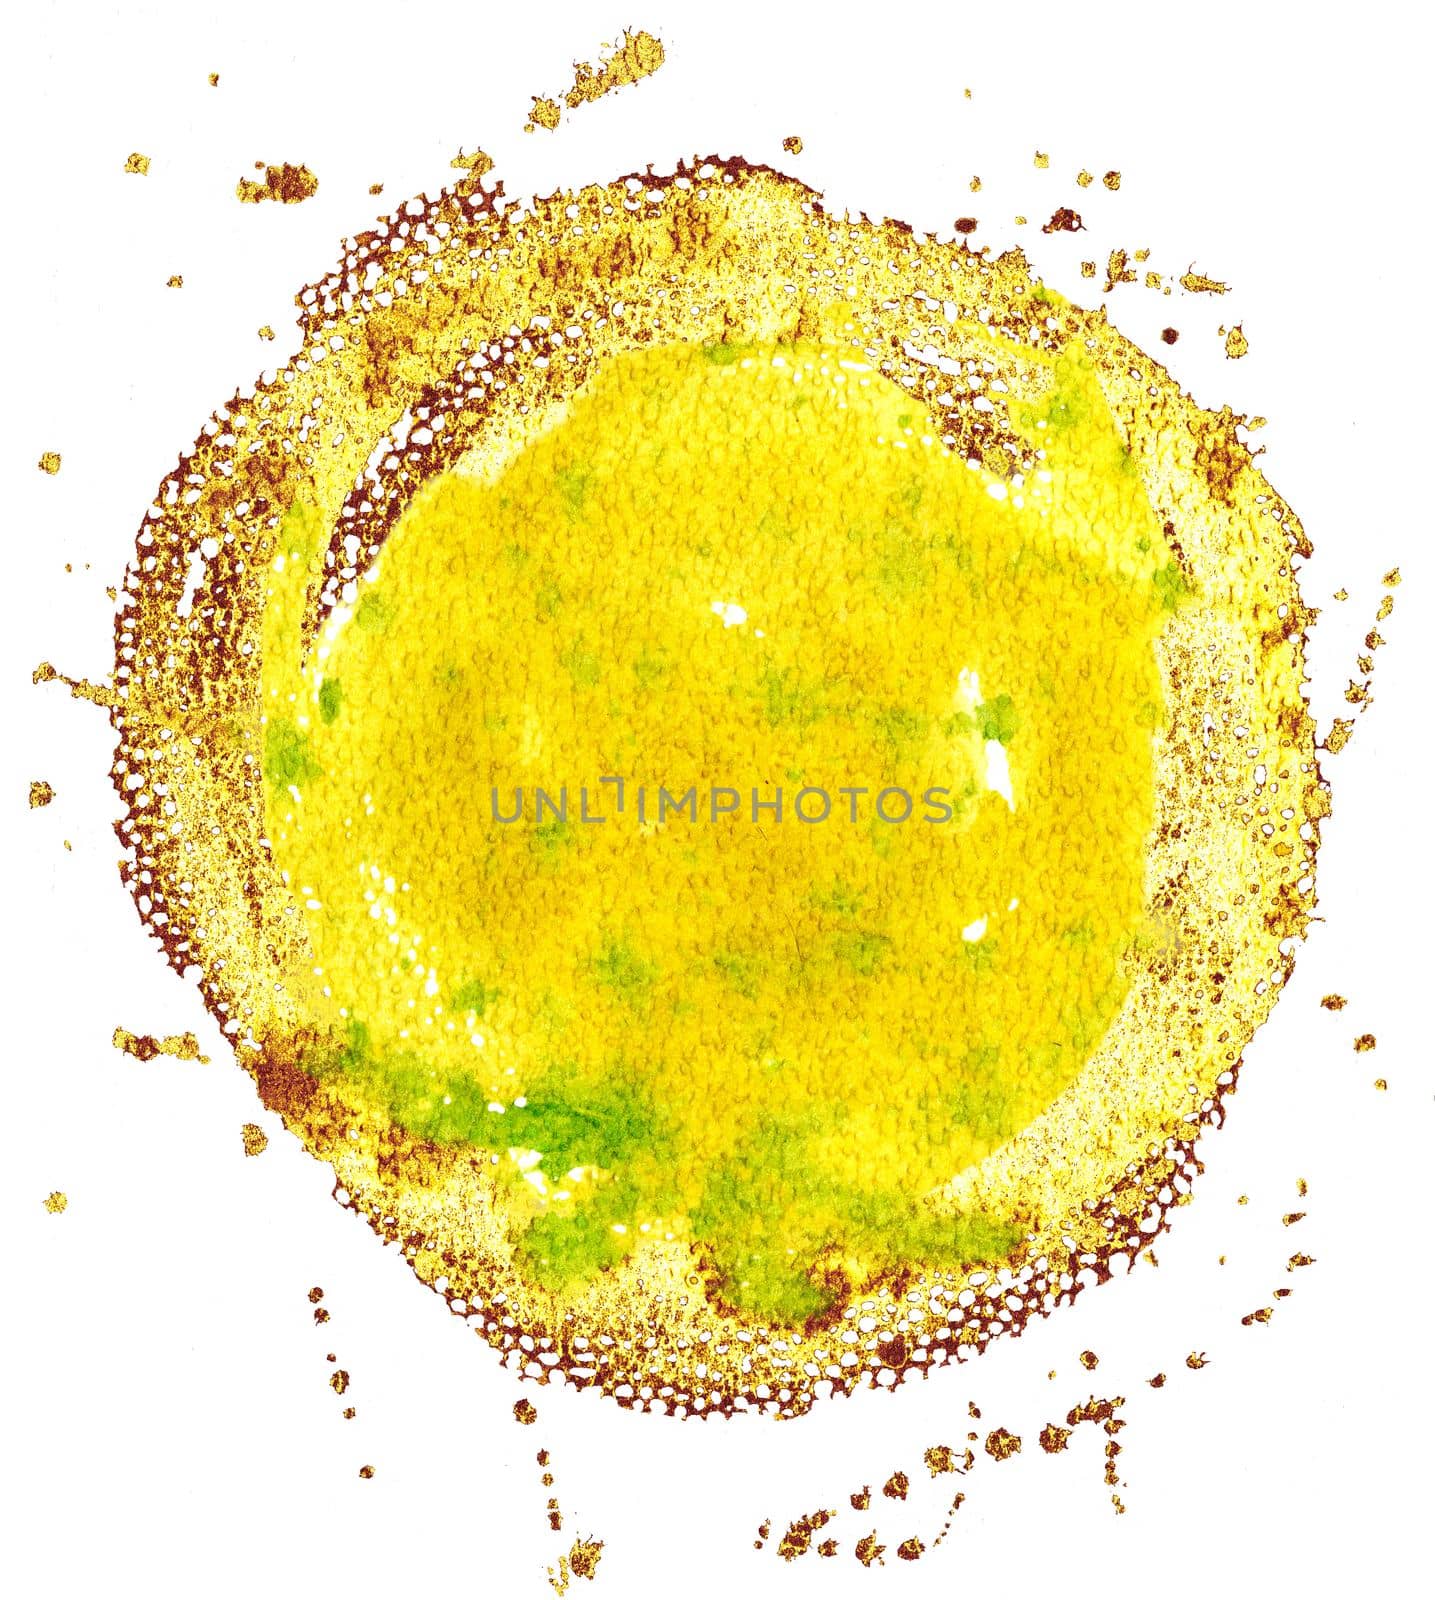 Yellow and gold watercolor circle isolated on white background